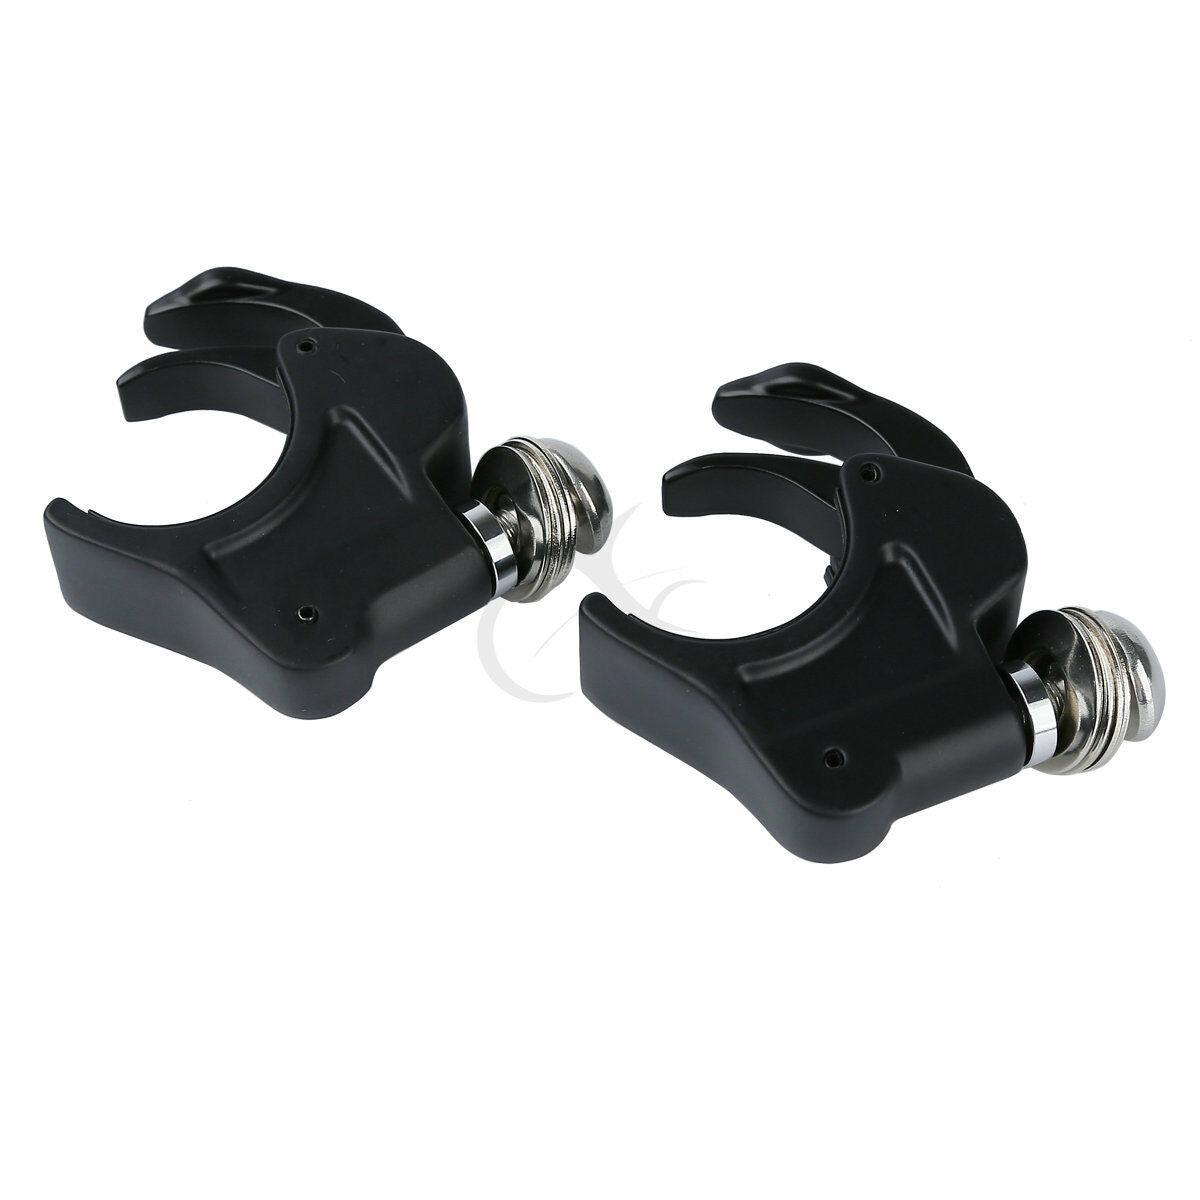 4PCS Black 41mm Windshield Clamps For Harley Softail FXST 1988-2013 FXDWG 93-05 - Moto Life Products